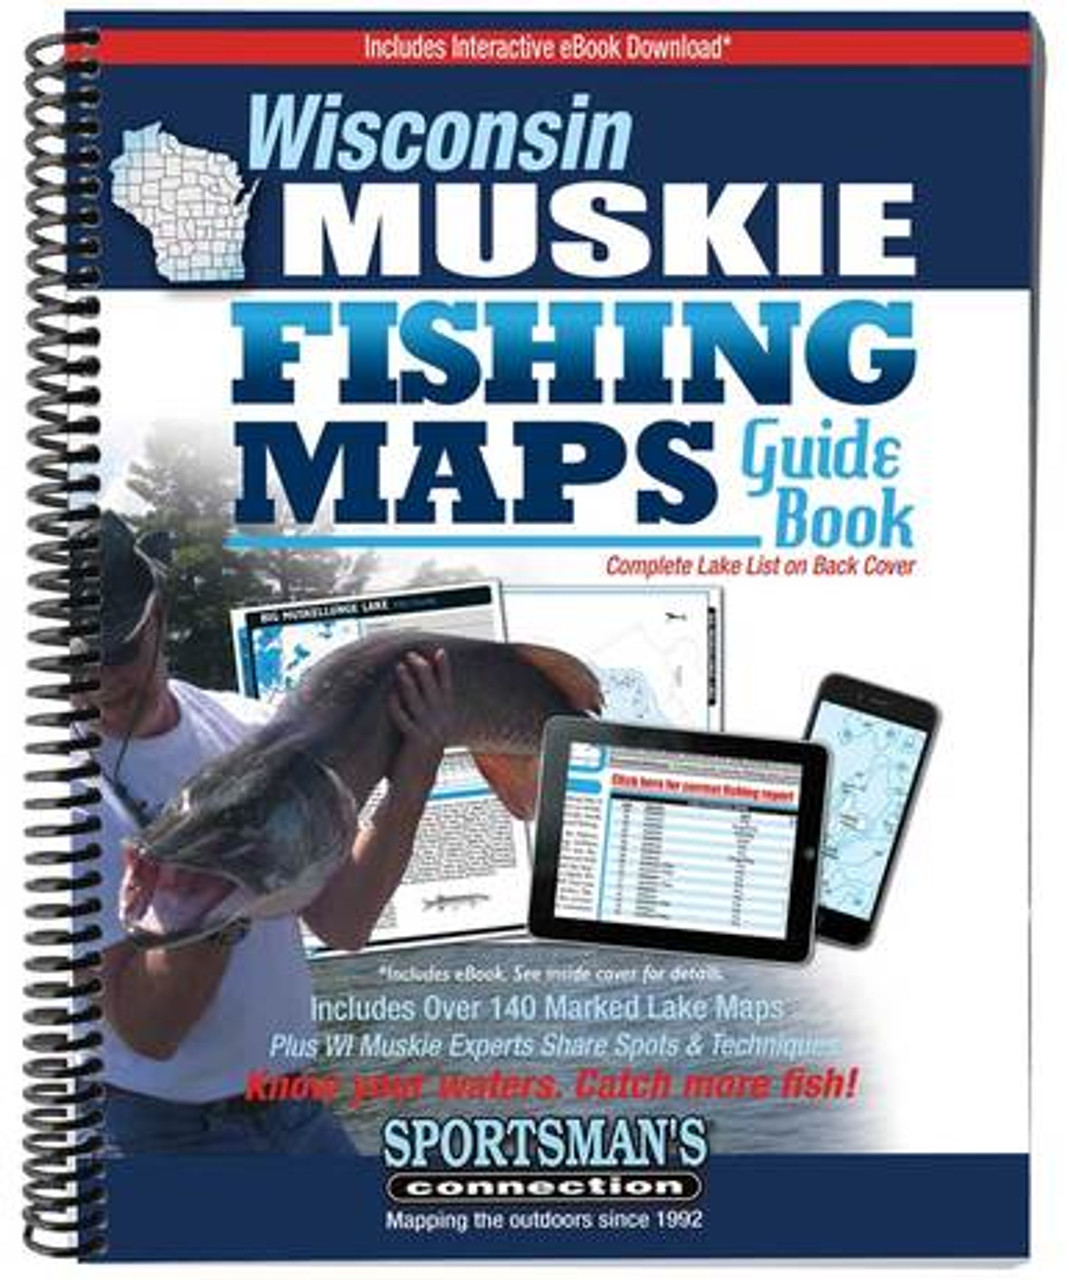 Wisconsin Muskie Fishing Maps Guide Book - WisconsinMade Artisan Collective